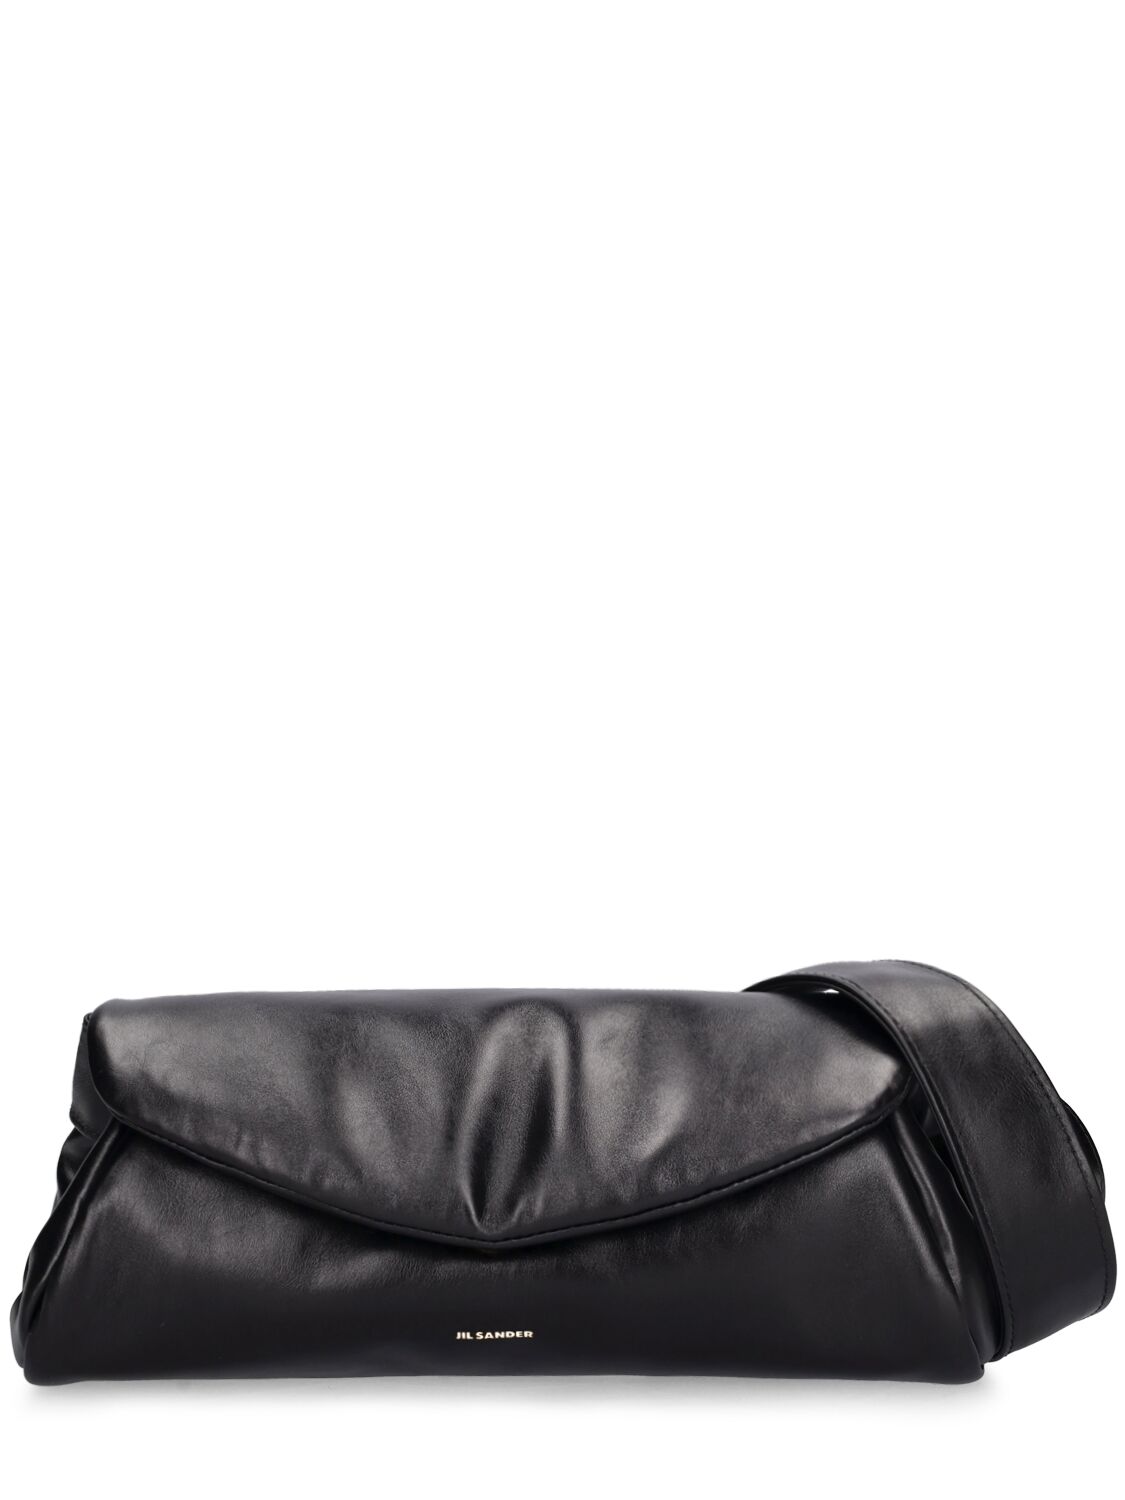 Jil Sander Small Cannolo Padded Leather Bag In Black